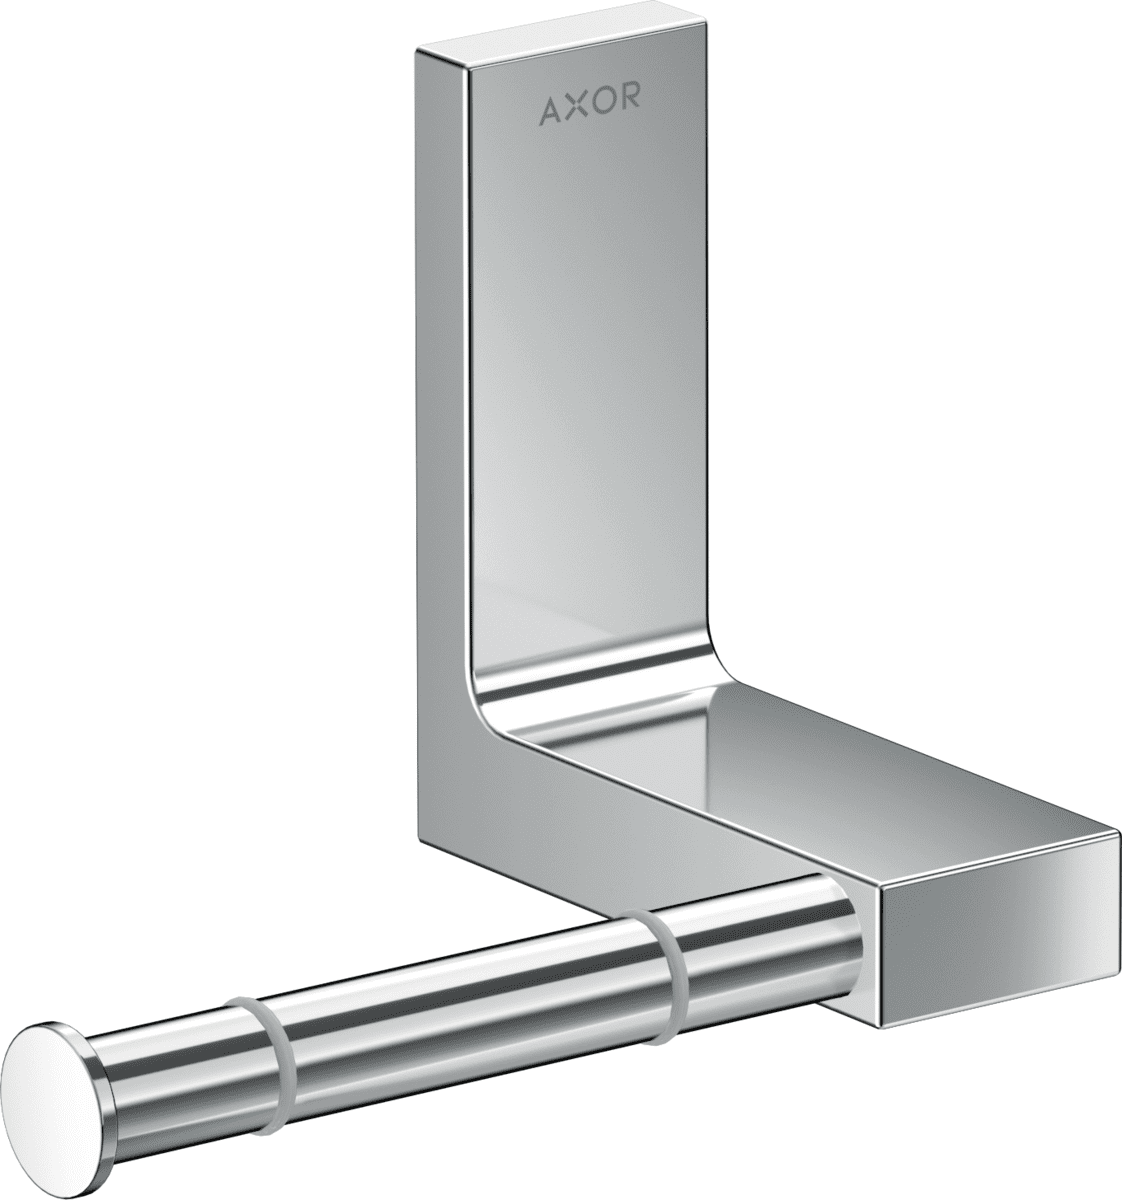 Picture of HANSGROHE AXOR Universal Rectangular Toilet paper holder #42656000 - Chrome